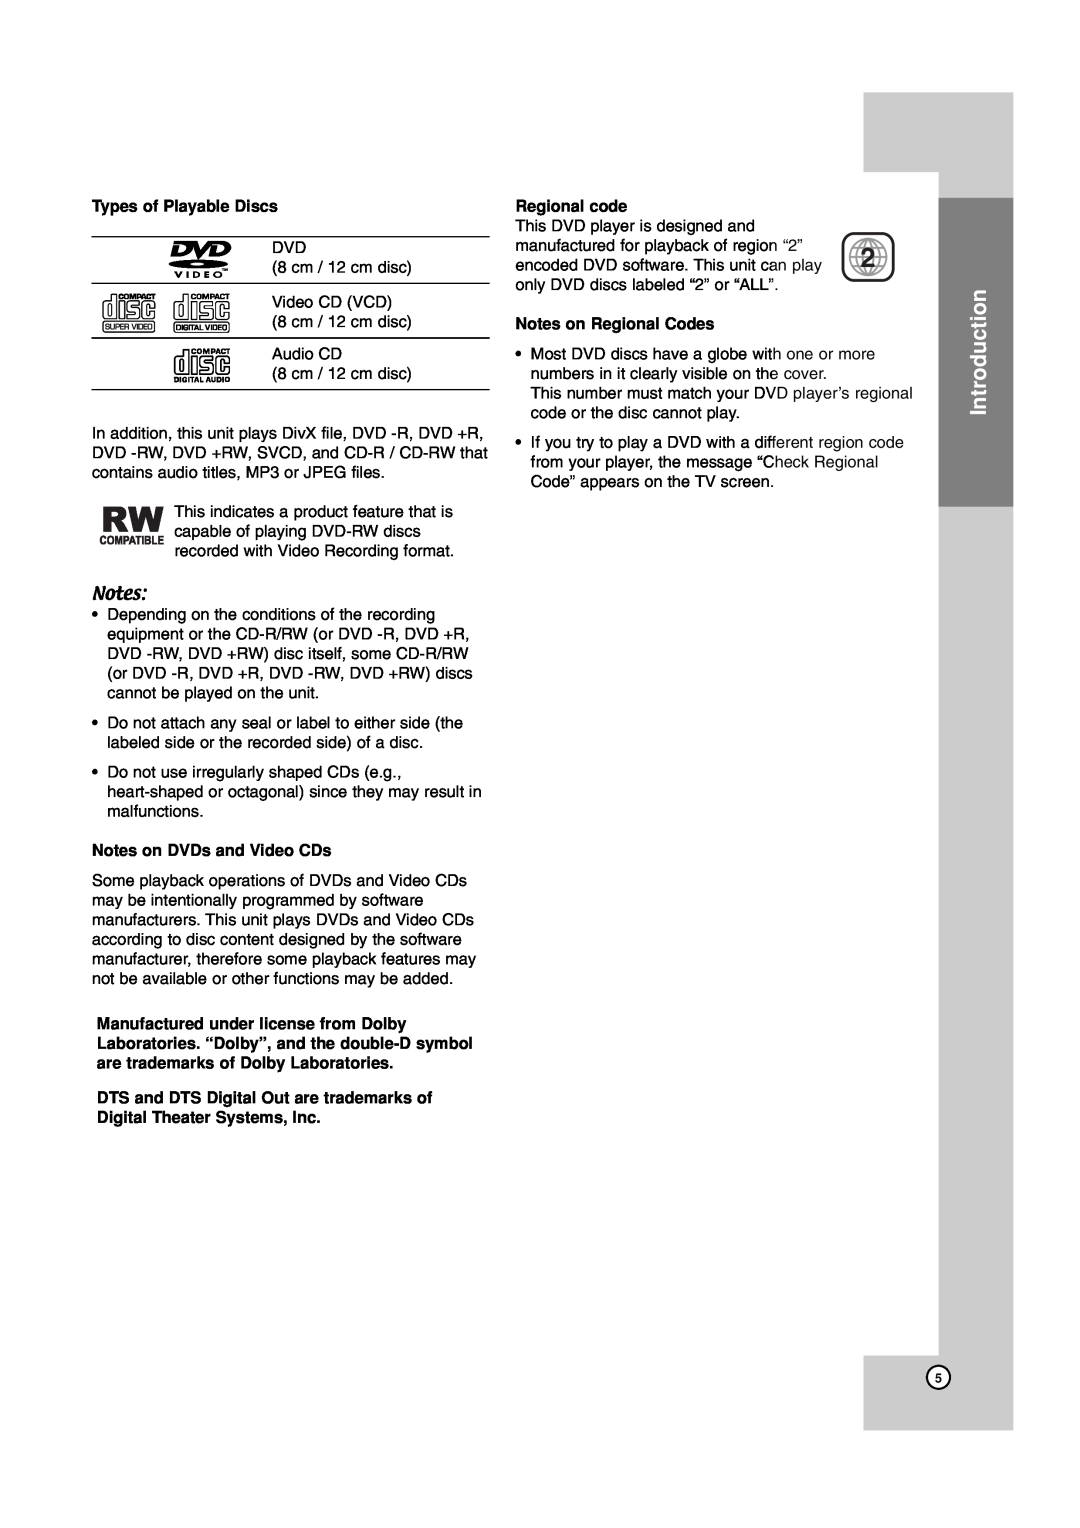 JVC 3834RV0038A Introduction, Types of Playable Discs, Notes on DVDs and Video CDs, Regional code, Notes on Regional Codes 